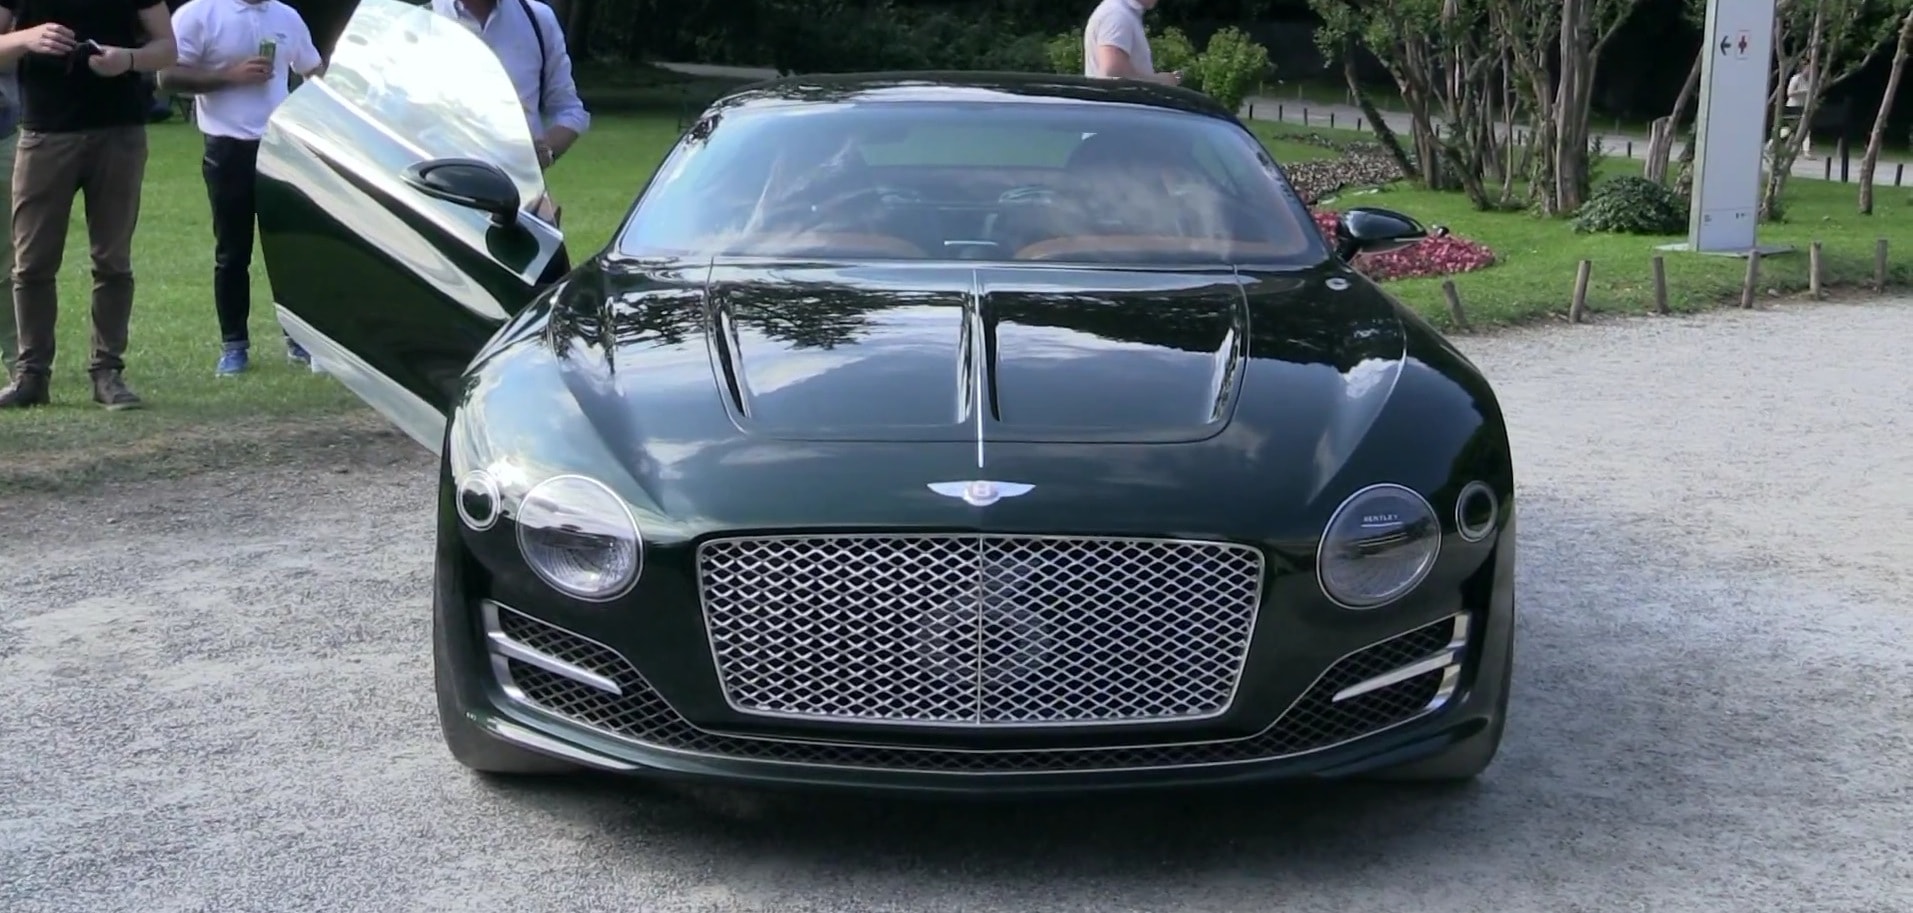 Bentley Exp 10 Speed 6 In Motion For The First Time Sounds Like 6 Cylinder Autoevolution